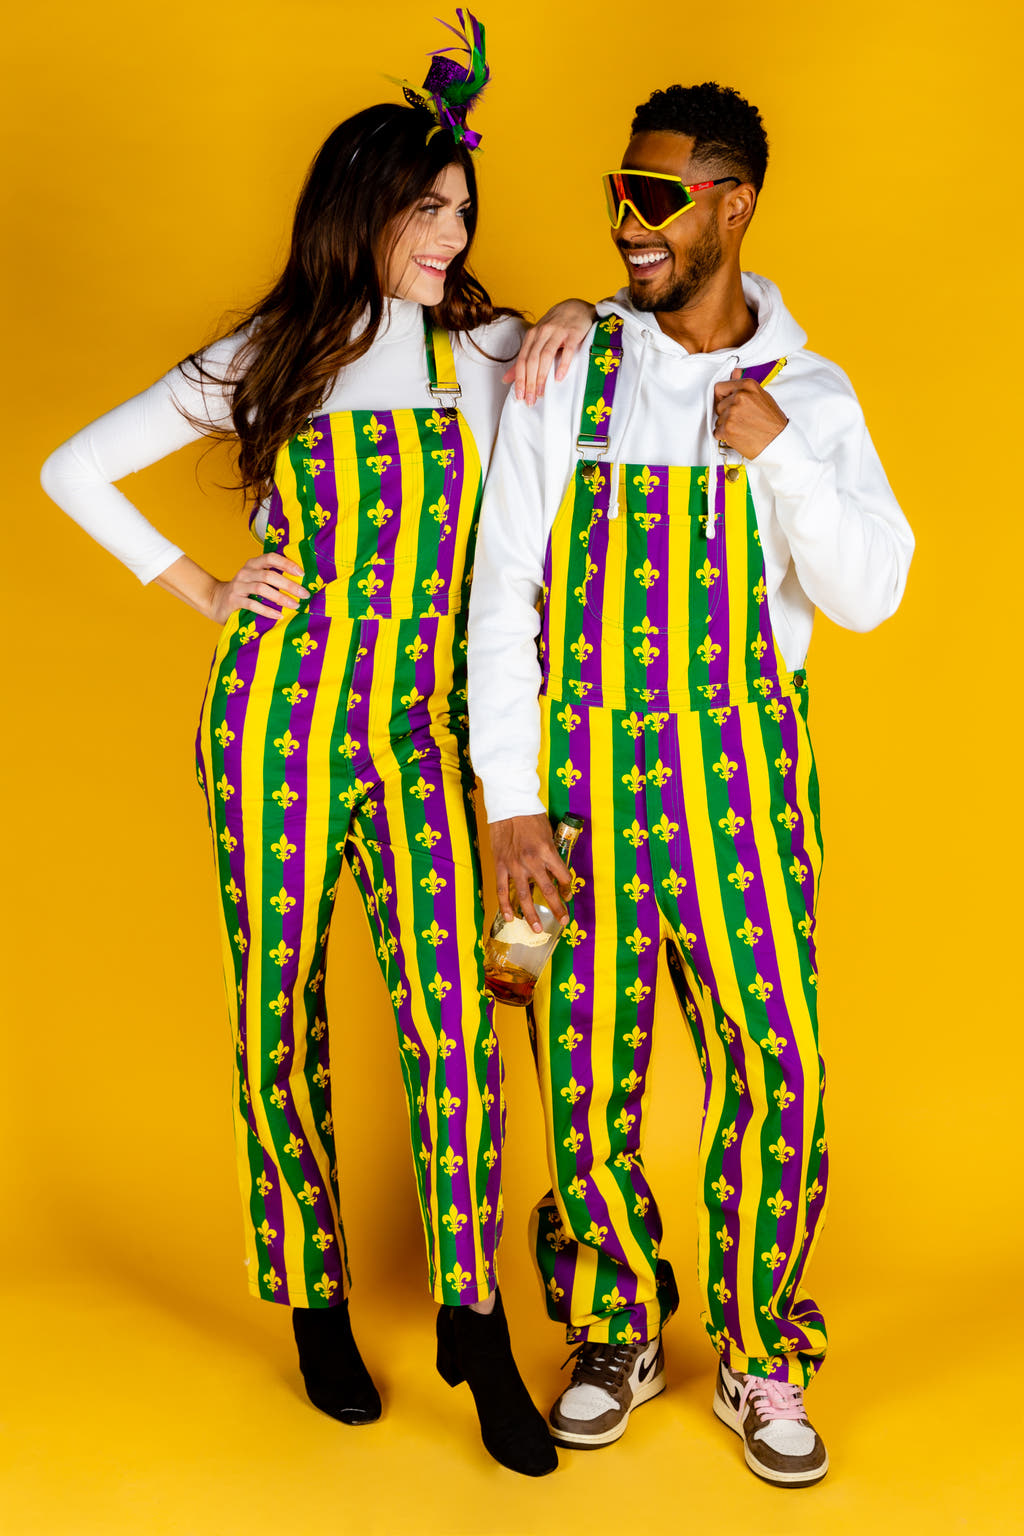 A man and woman in Mardi Gras overalls, ready for a day of celebration with beignets in hand.